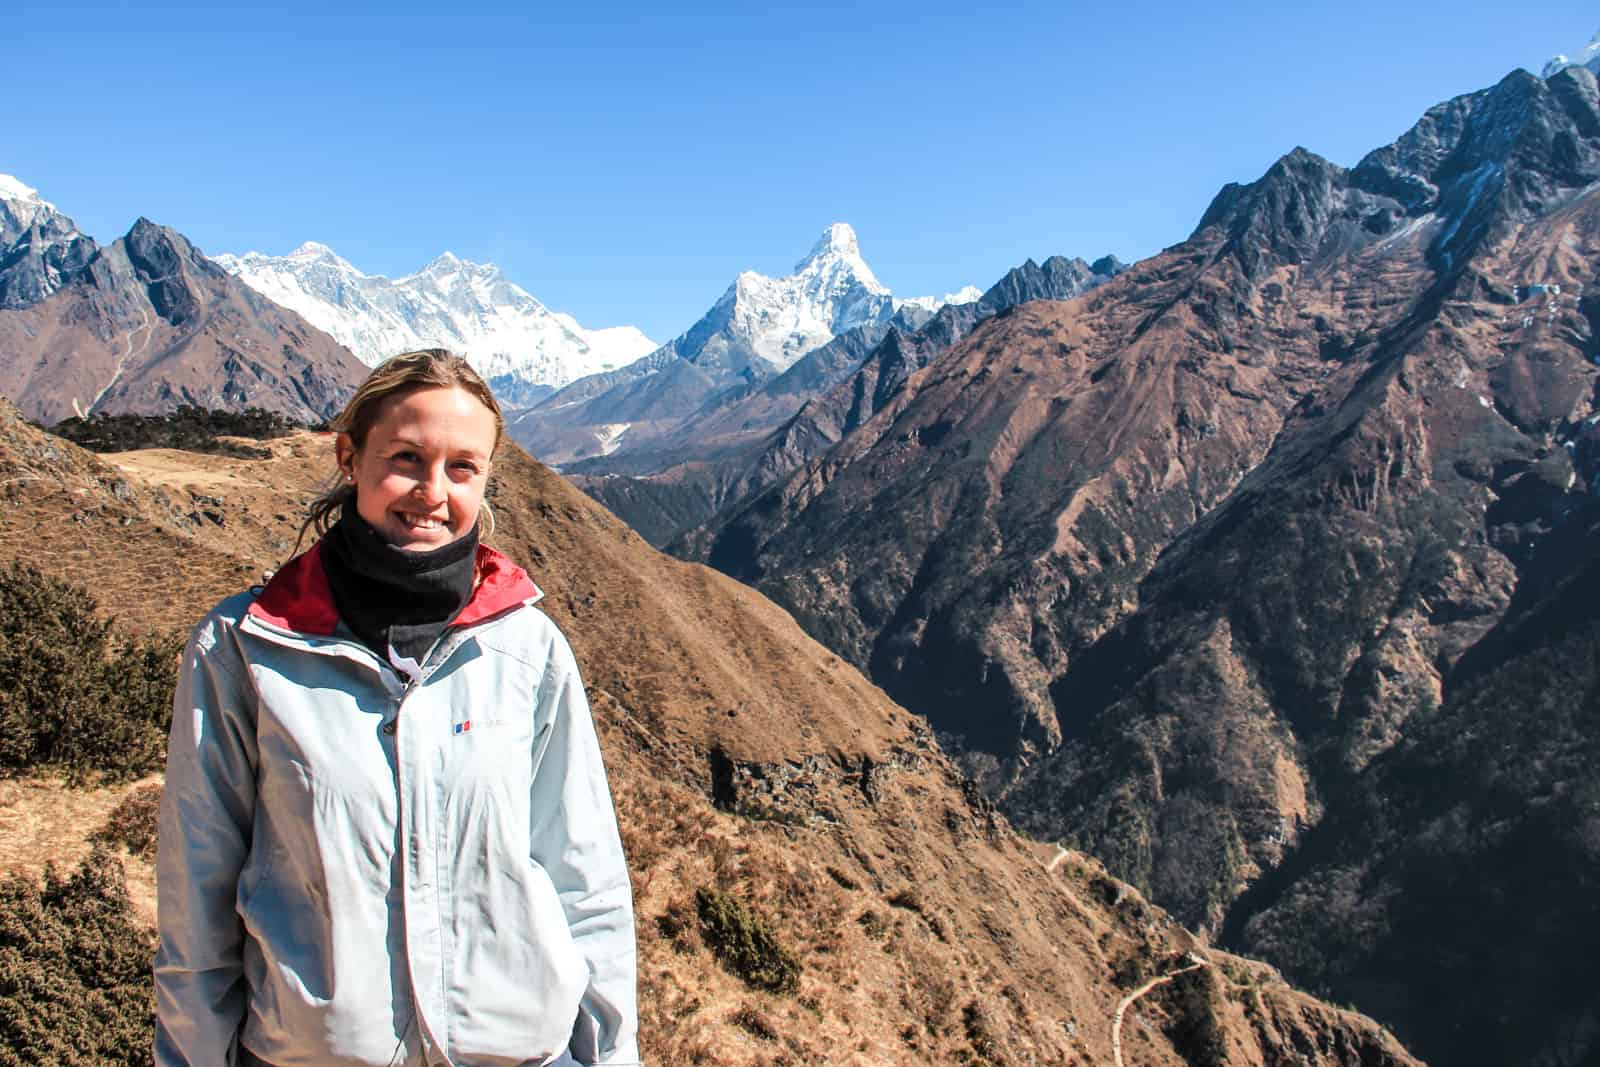 A smiling woman in a pale blue jacket stands on a golden brown mountain hillside. In the far distance is the snow capped Mount Everest